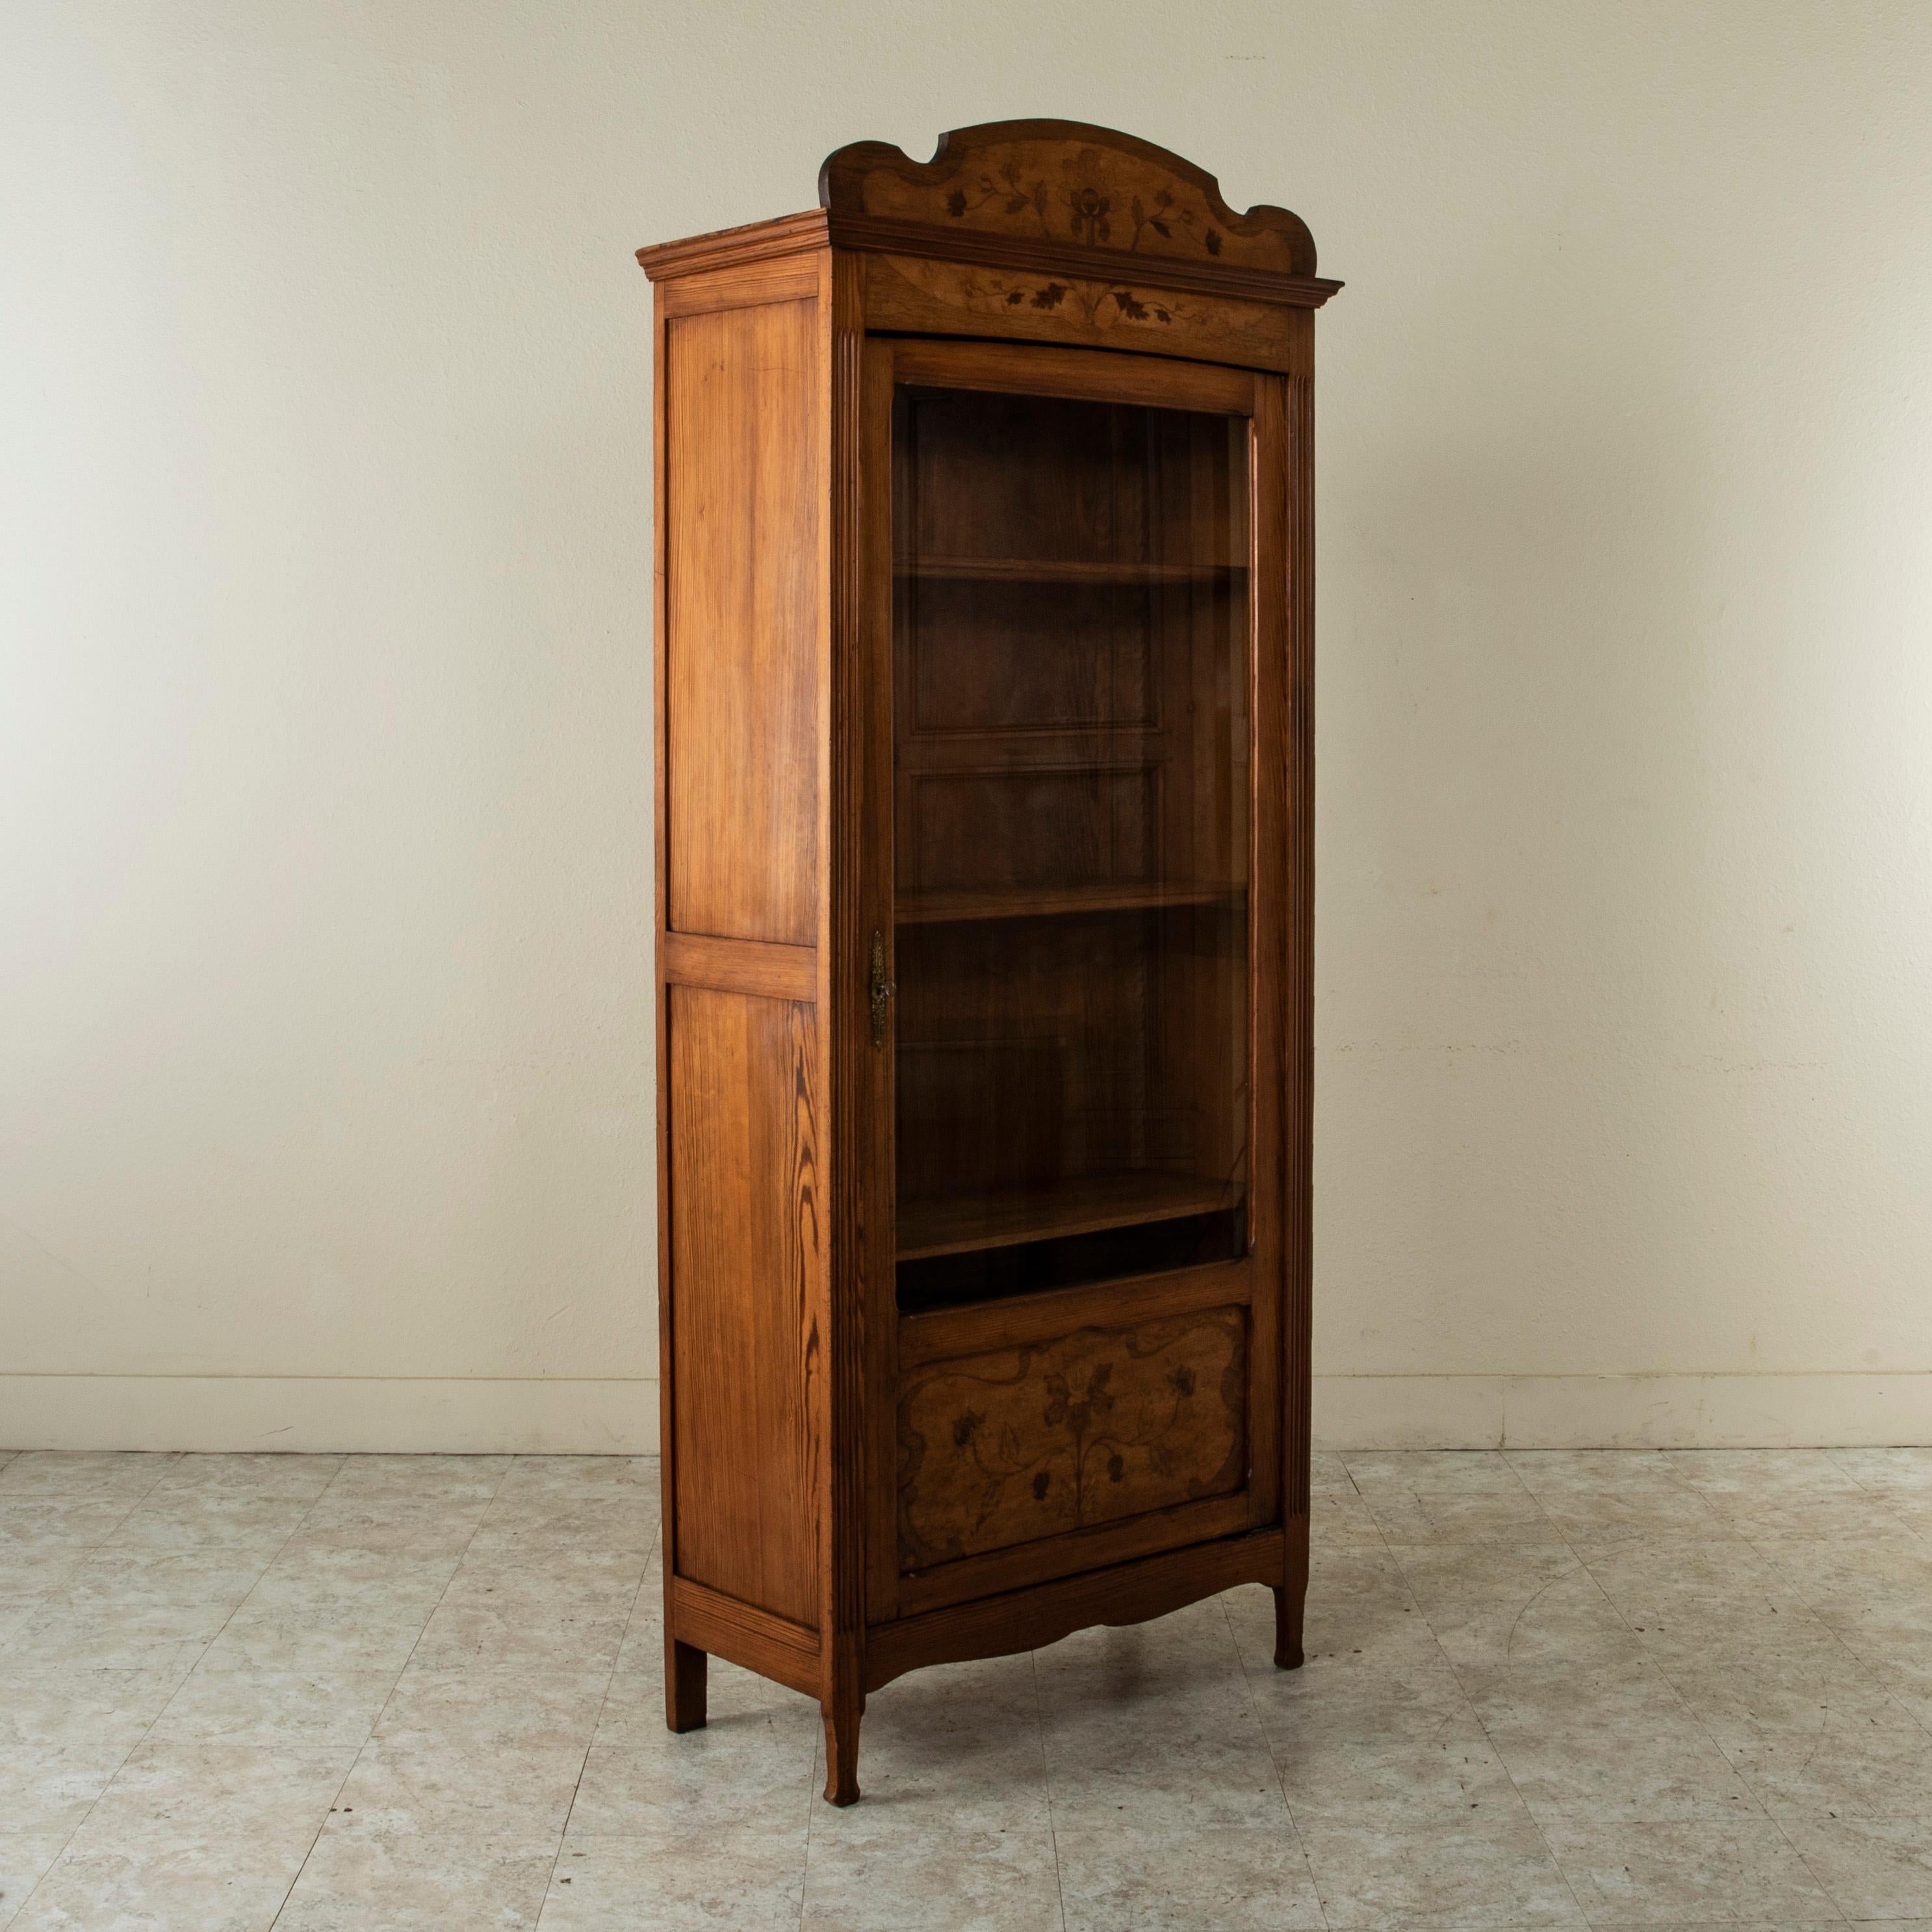 This French Art Nouveau period bookcase or vitrine from the turn of the twentieth century is constructed of solid pitch pine and features a symmetrical inlaid floral motif on the pediment and lower door panel. Fluted columns flank its single door.